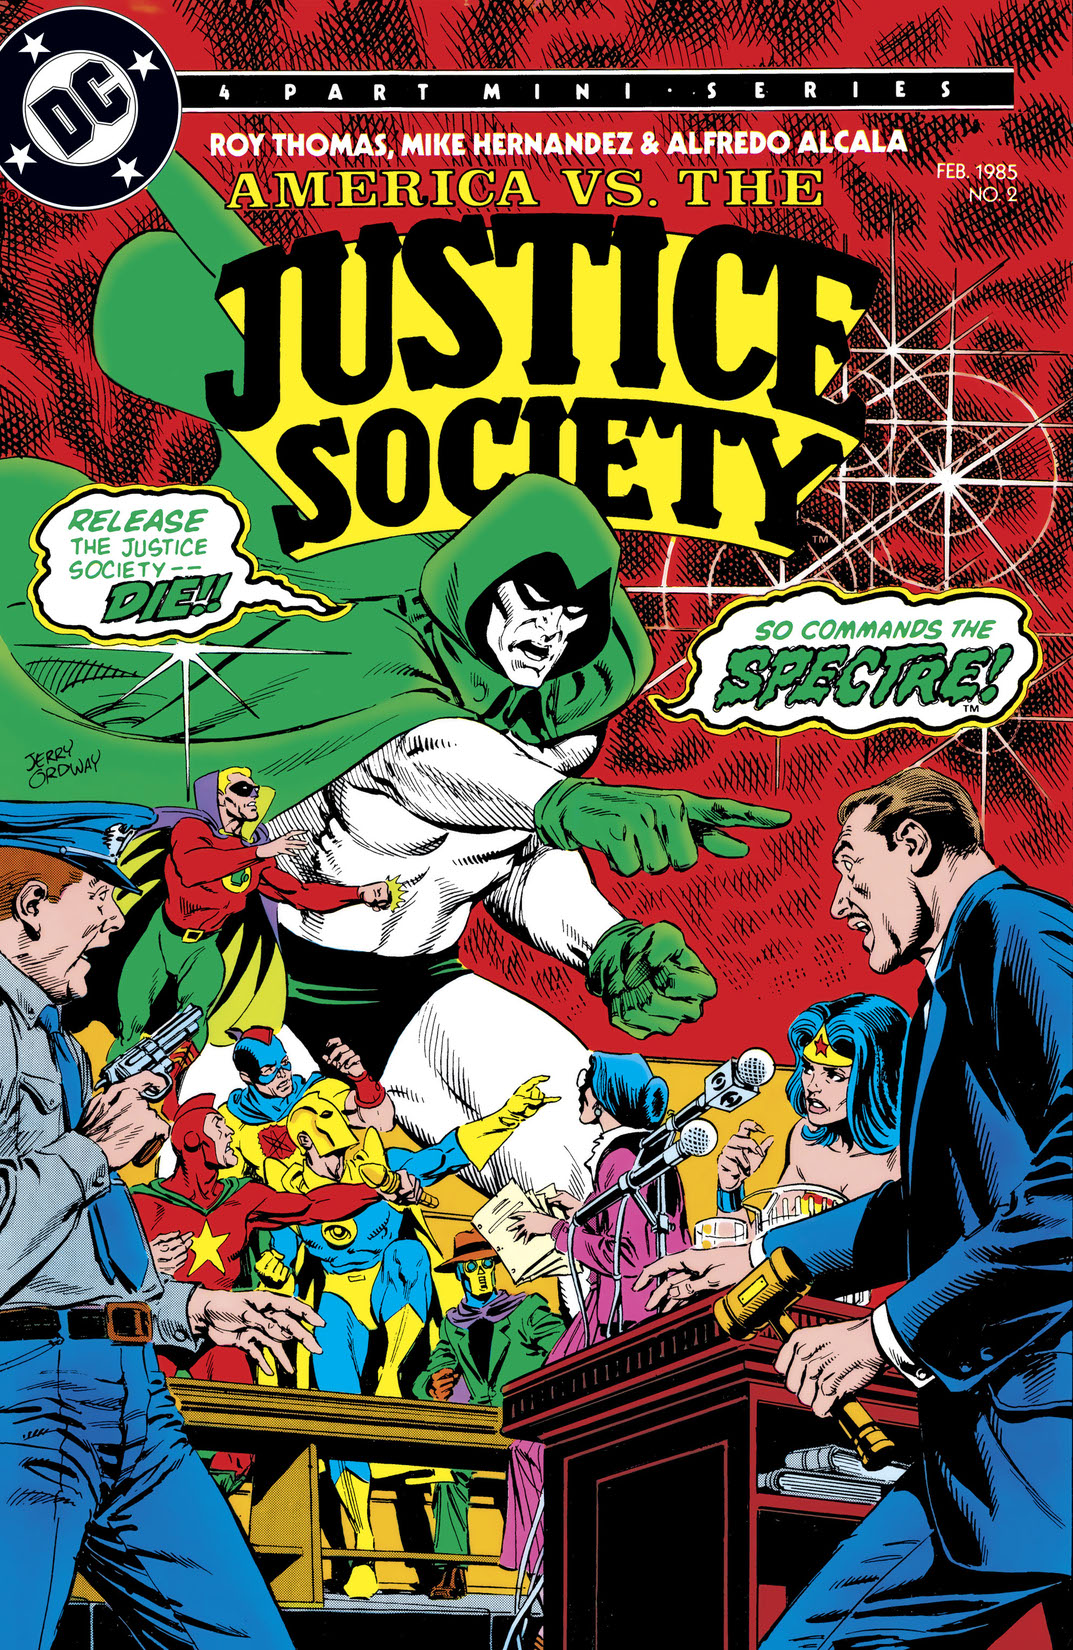 America vs. The Justice Society #2 preview images